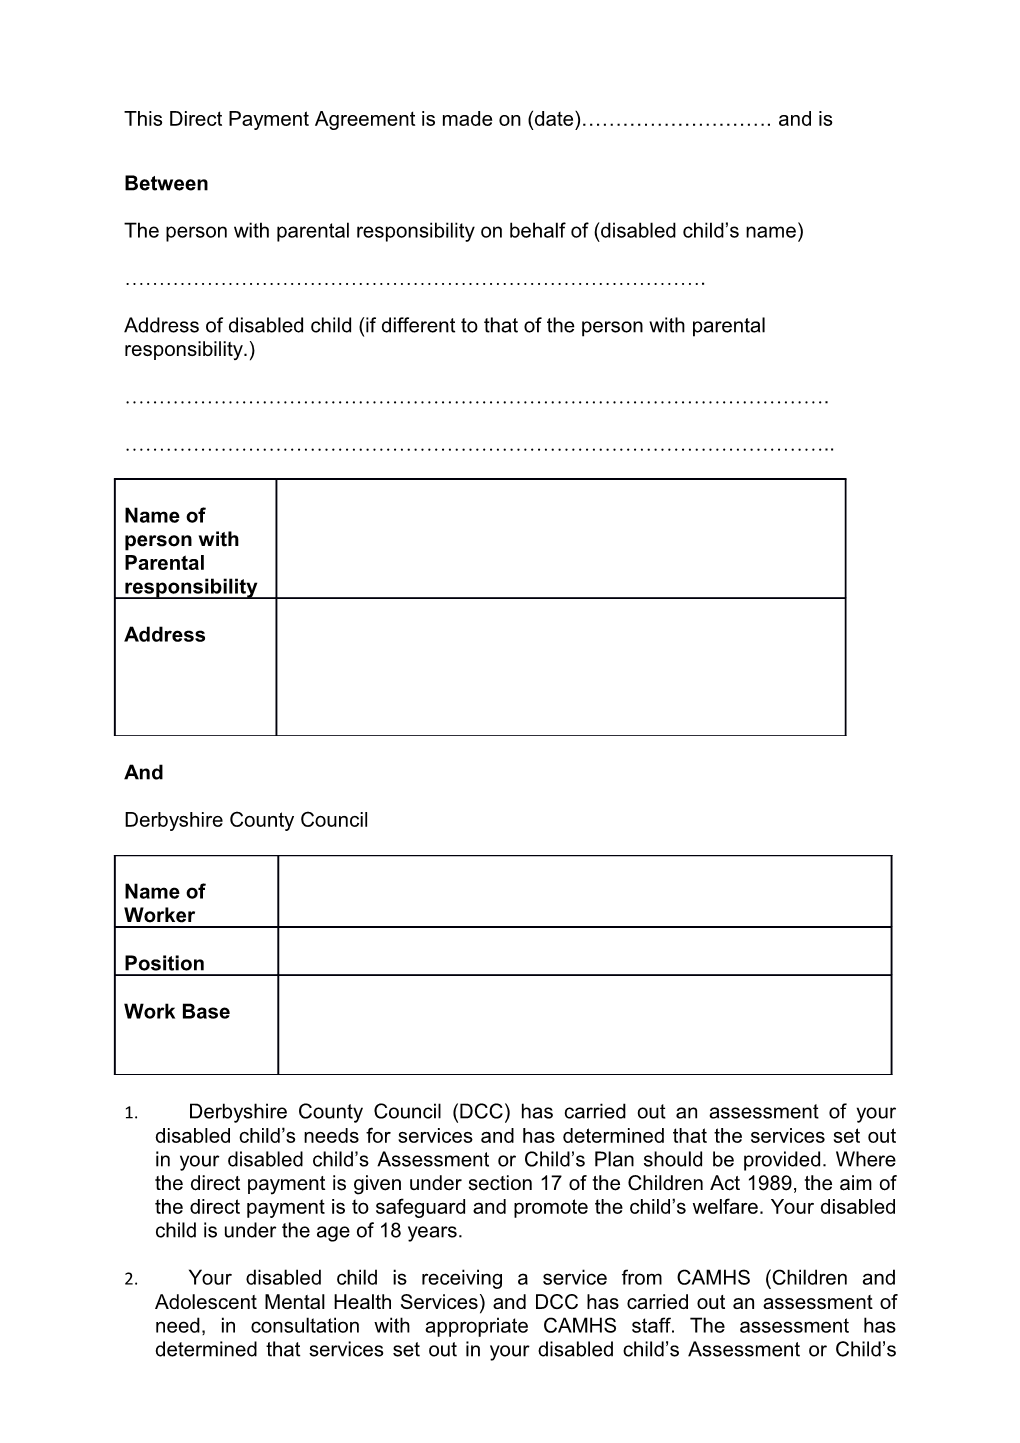 Direct Payments Agreement Form